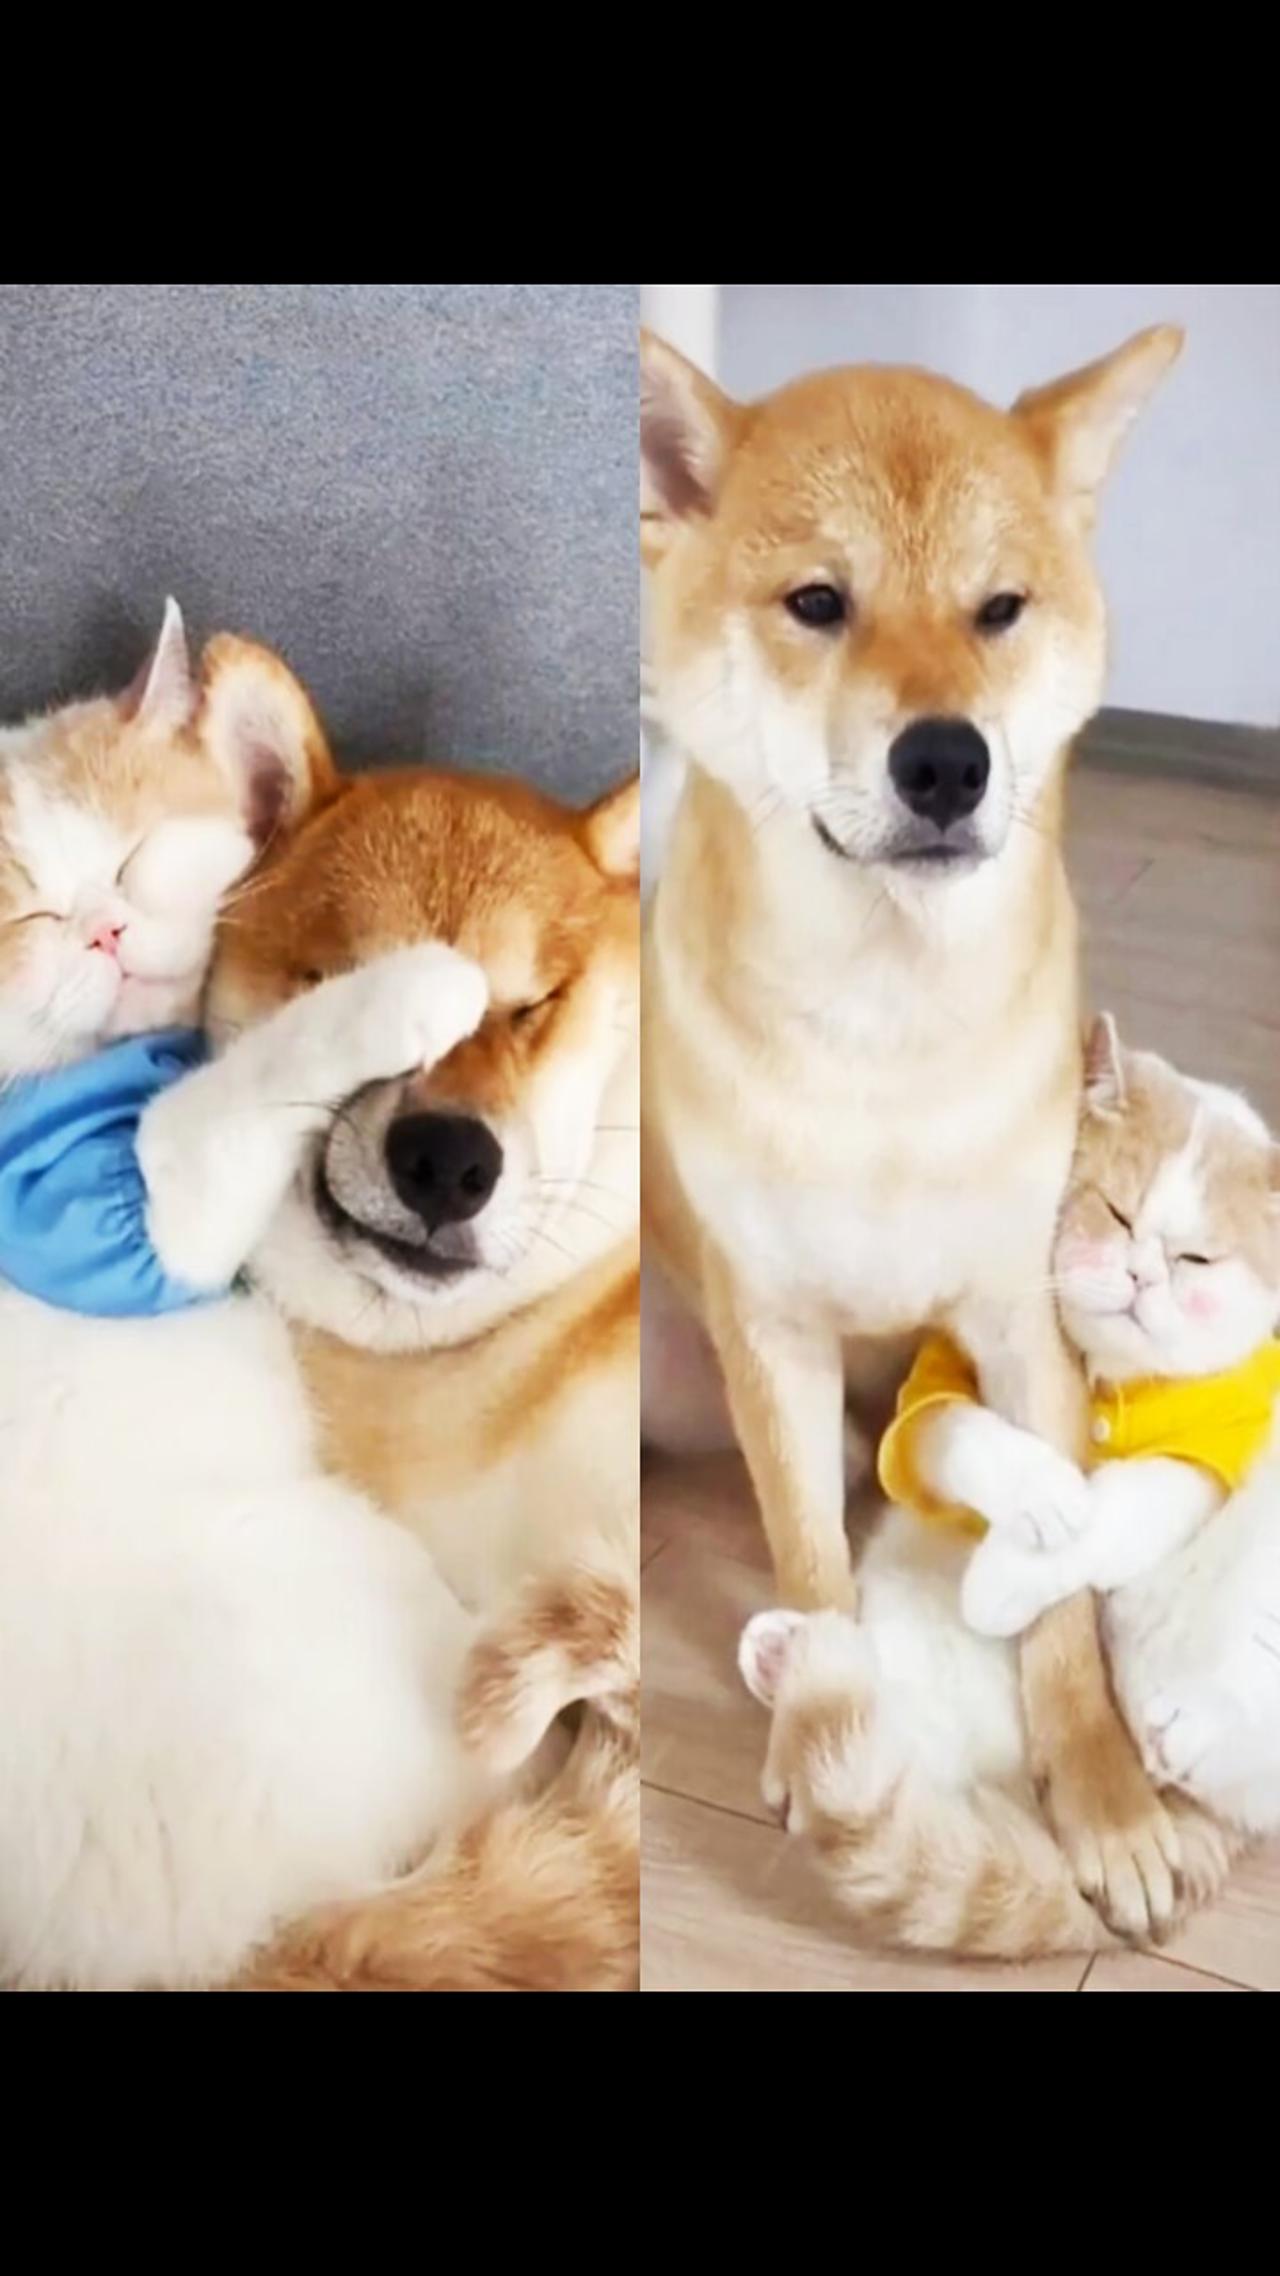 Cat and dog friendship bond cute and lazy very funny